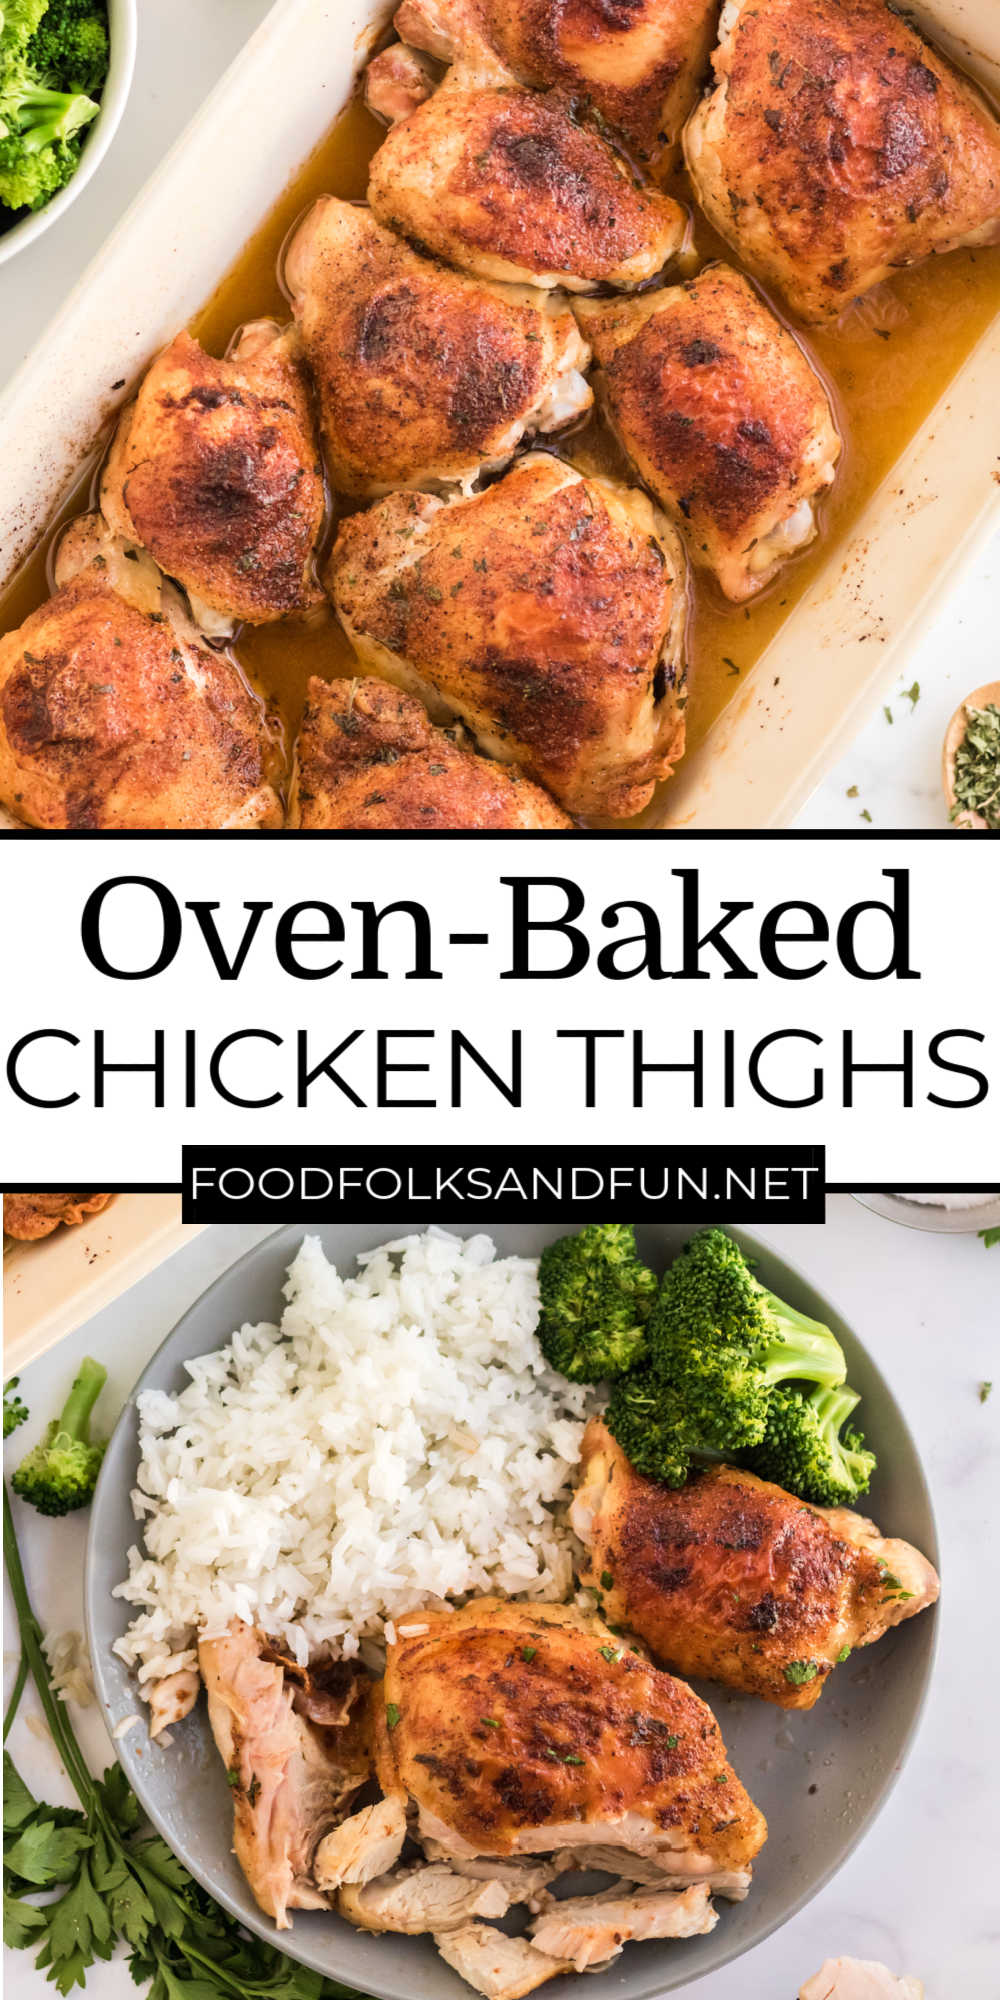 Easy Oven Baked Chicken Thighs in just 35 minutes!